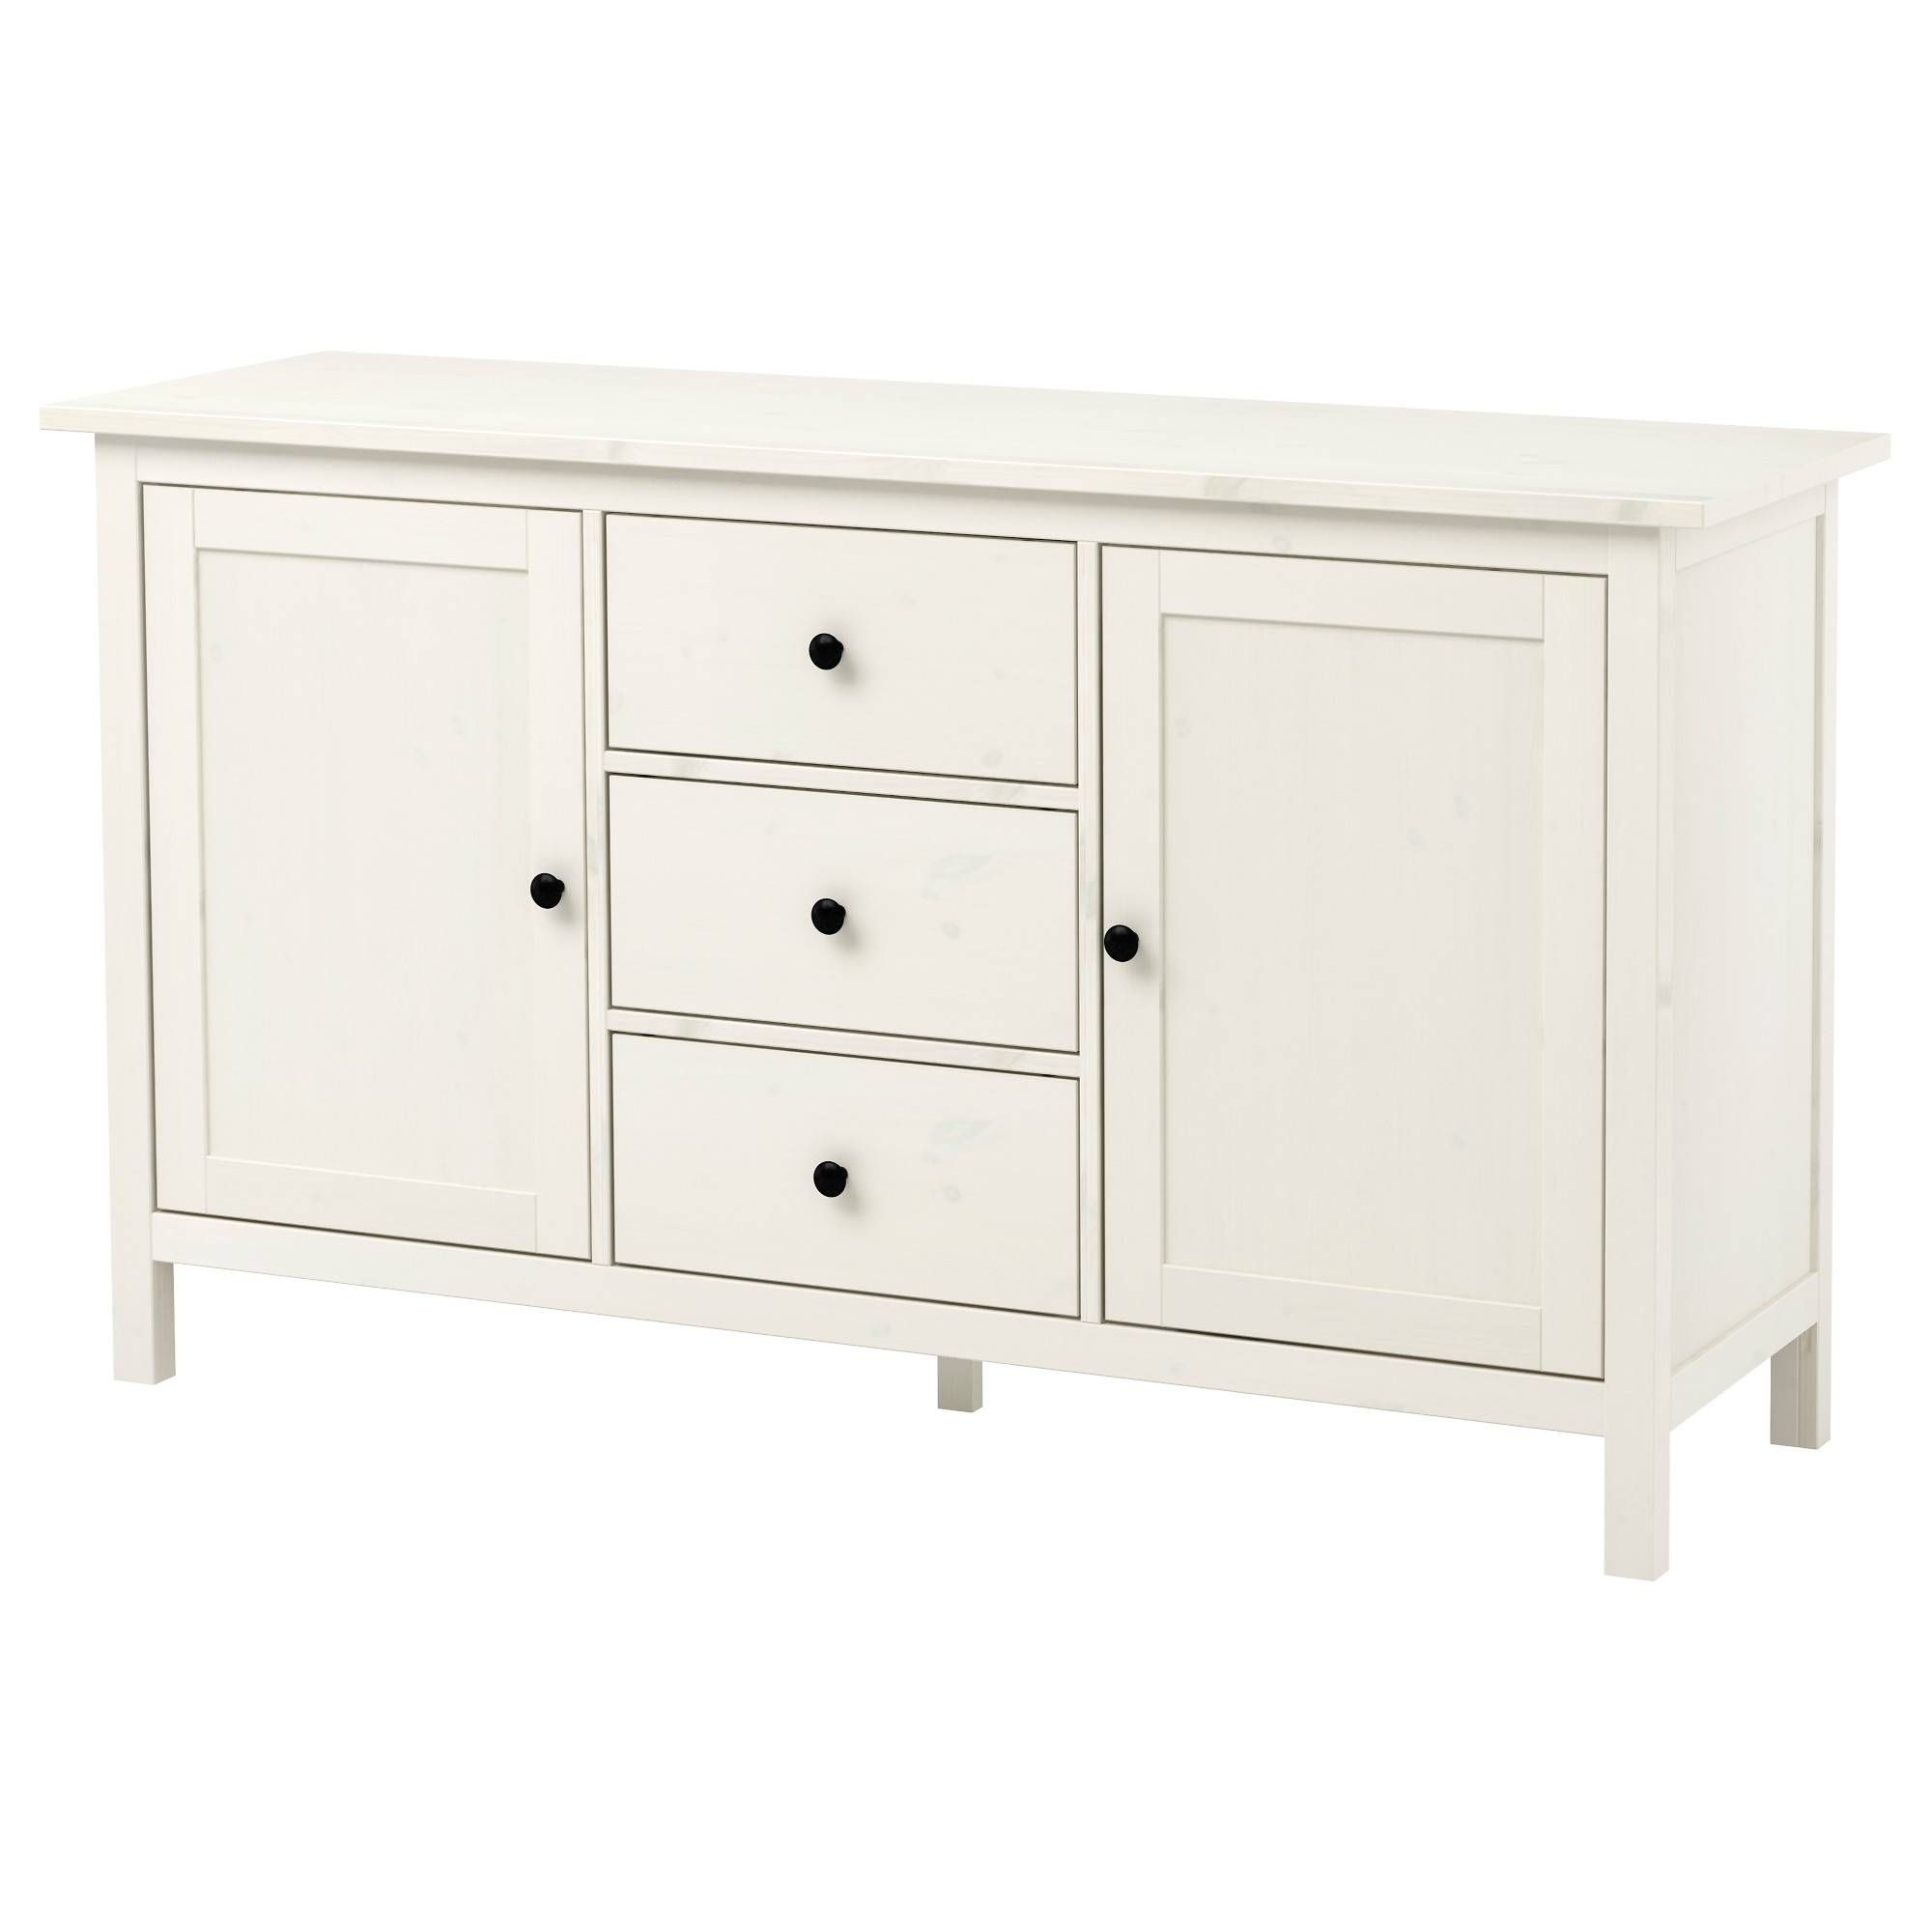 Hemnes Sideboard White Stain 157x88 Cm – Ikea Intended For Sideboards And Tables (View 3 of 15)